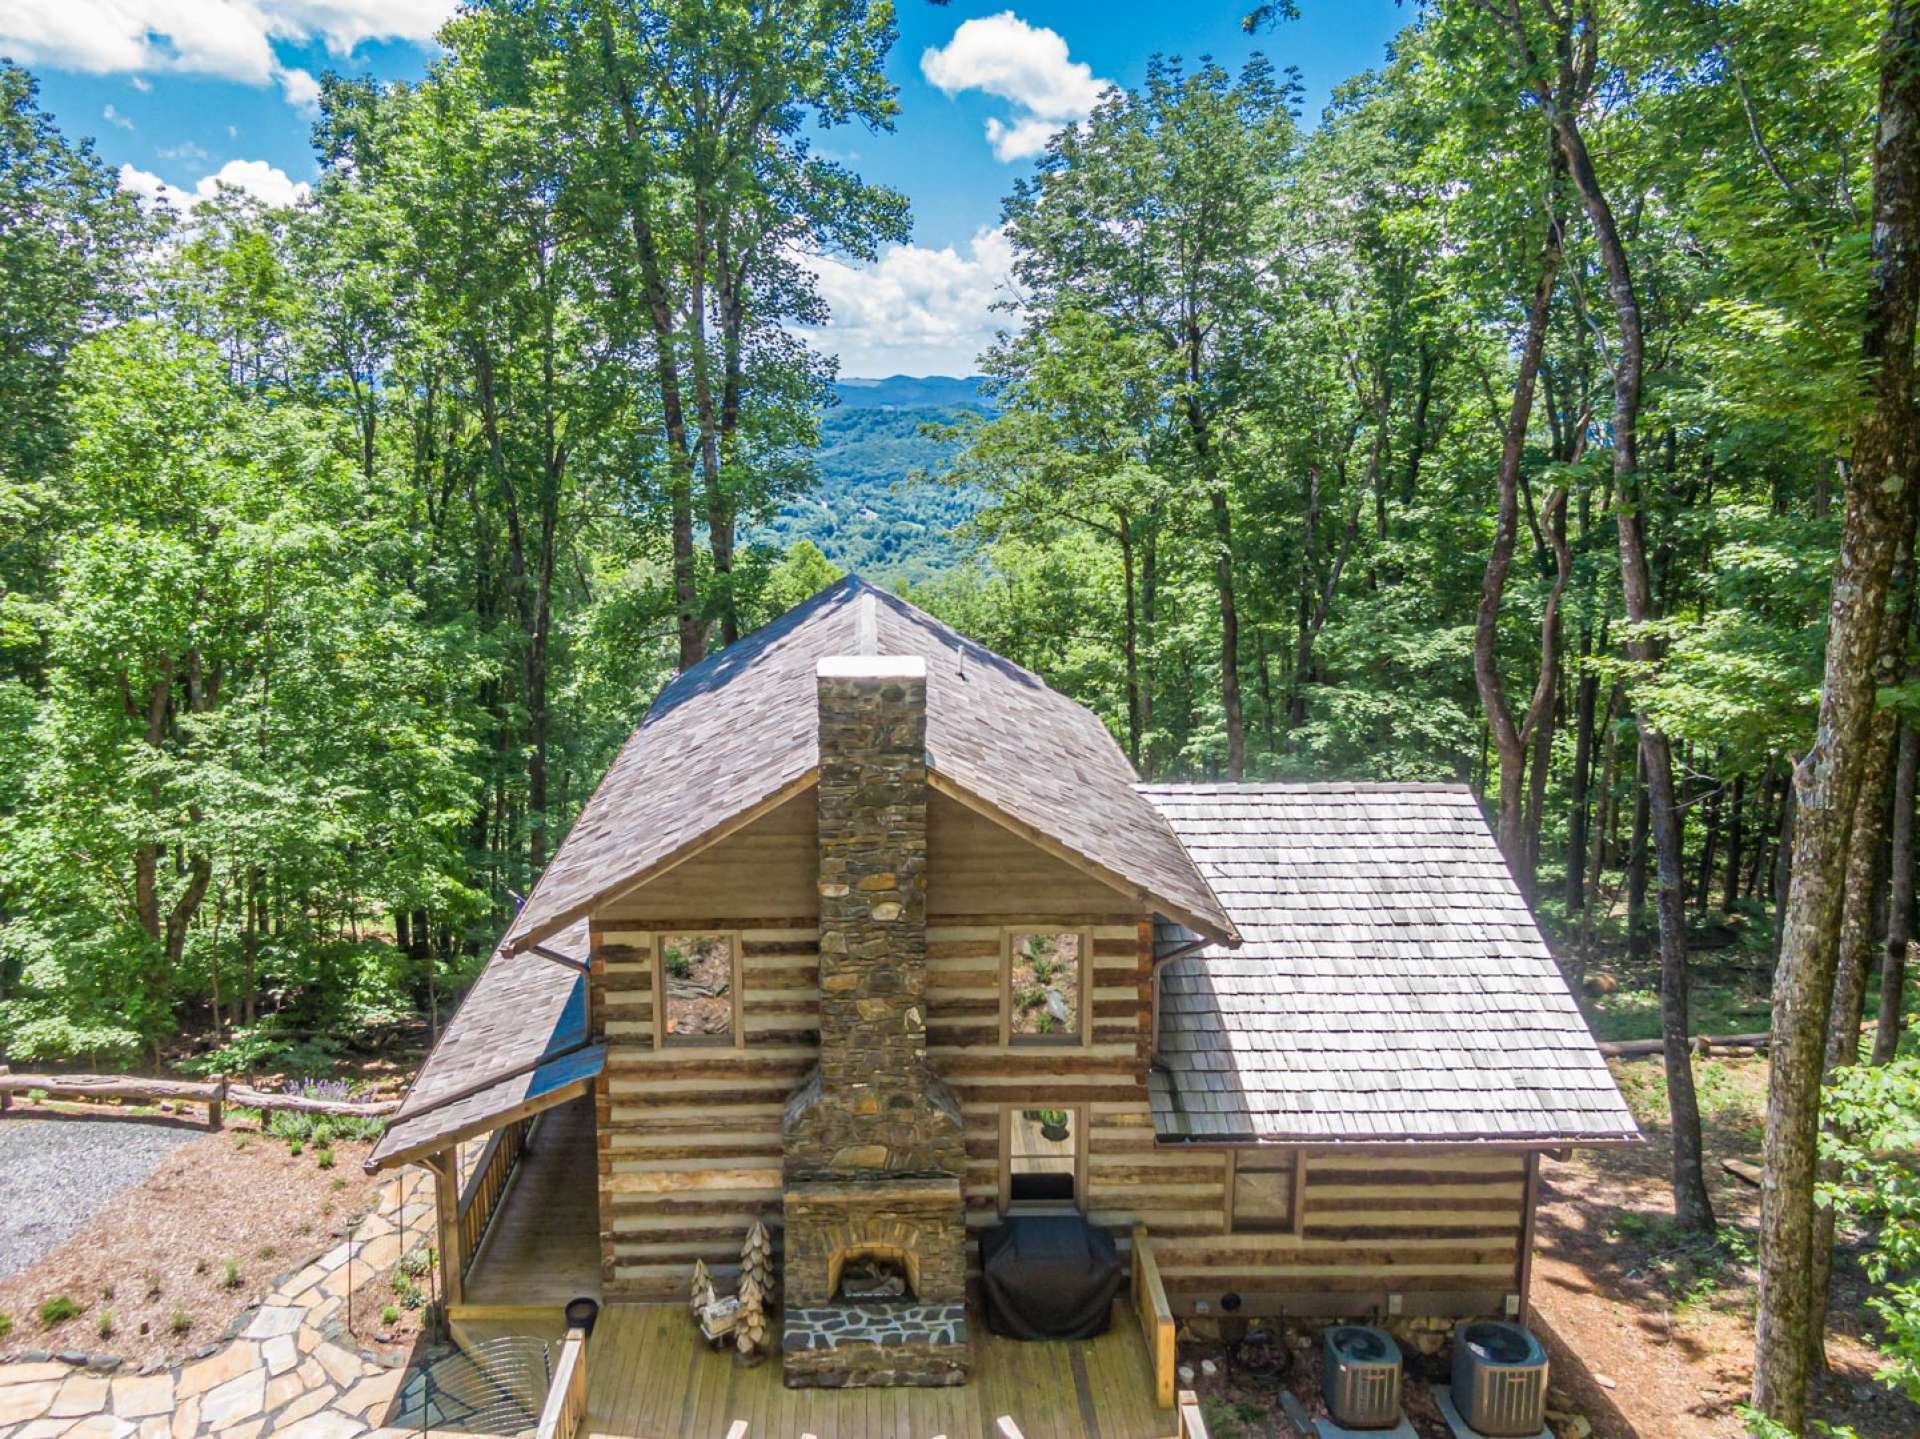 This photo shows the back deck featuring third stone fireplace and perfect for family get togethers, toasting marshmallows by the fire and planning the next day's activities. Will it be floating down the New River or hiking the Blue Ridge?